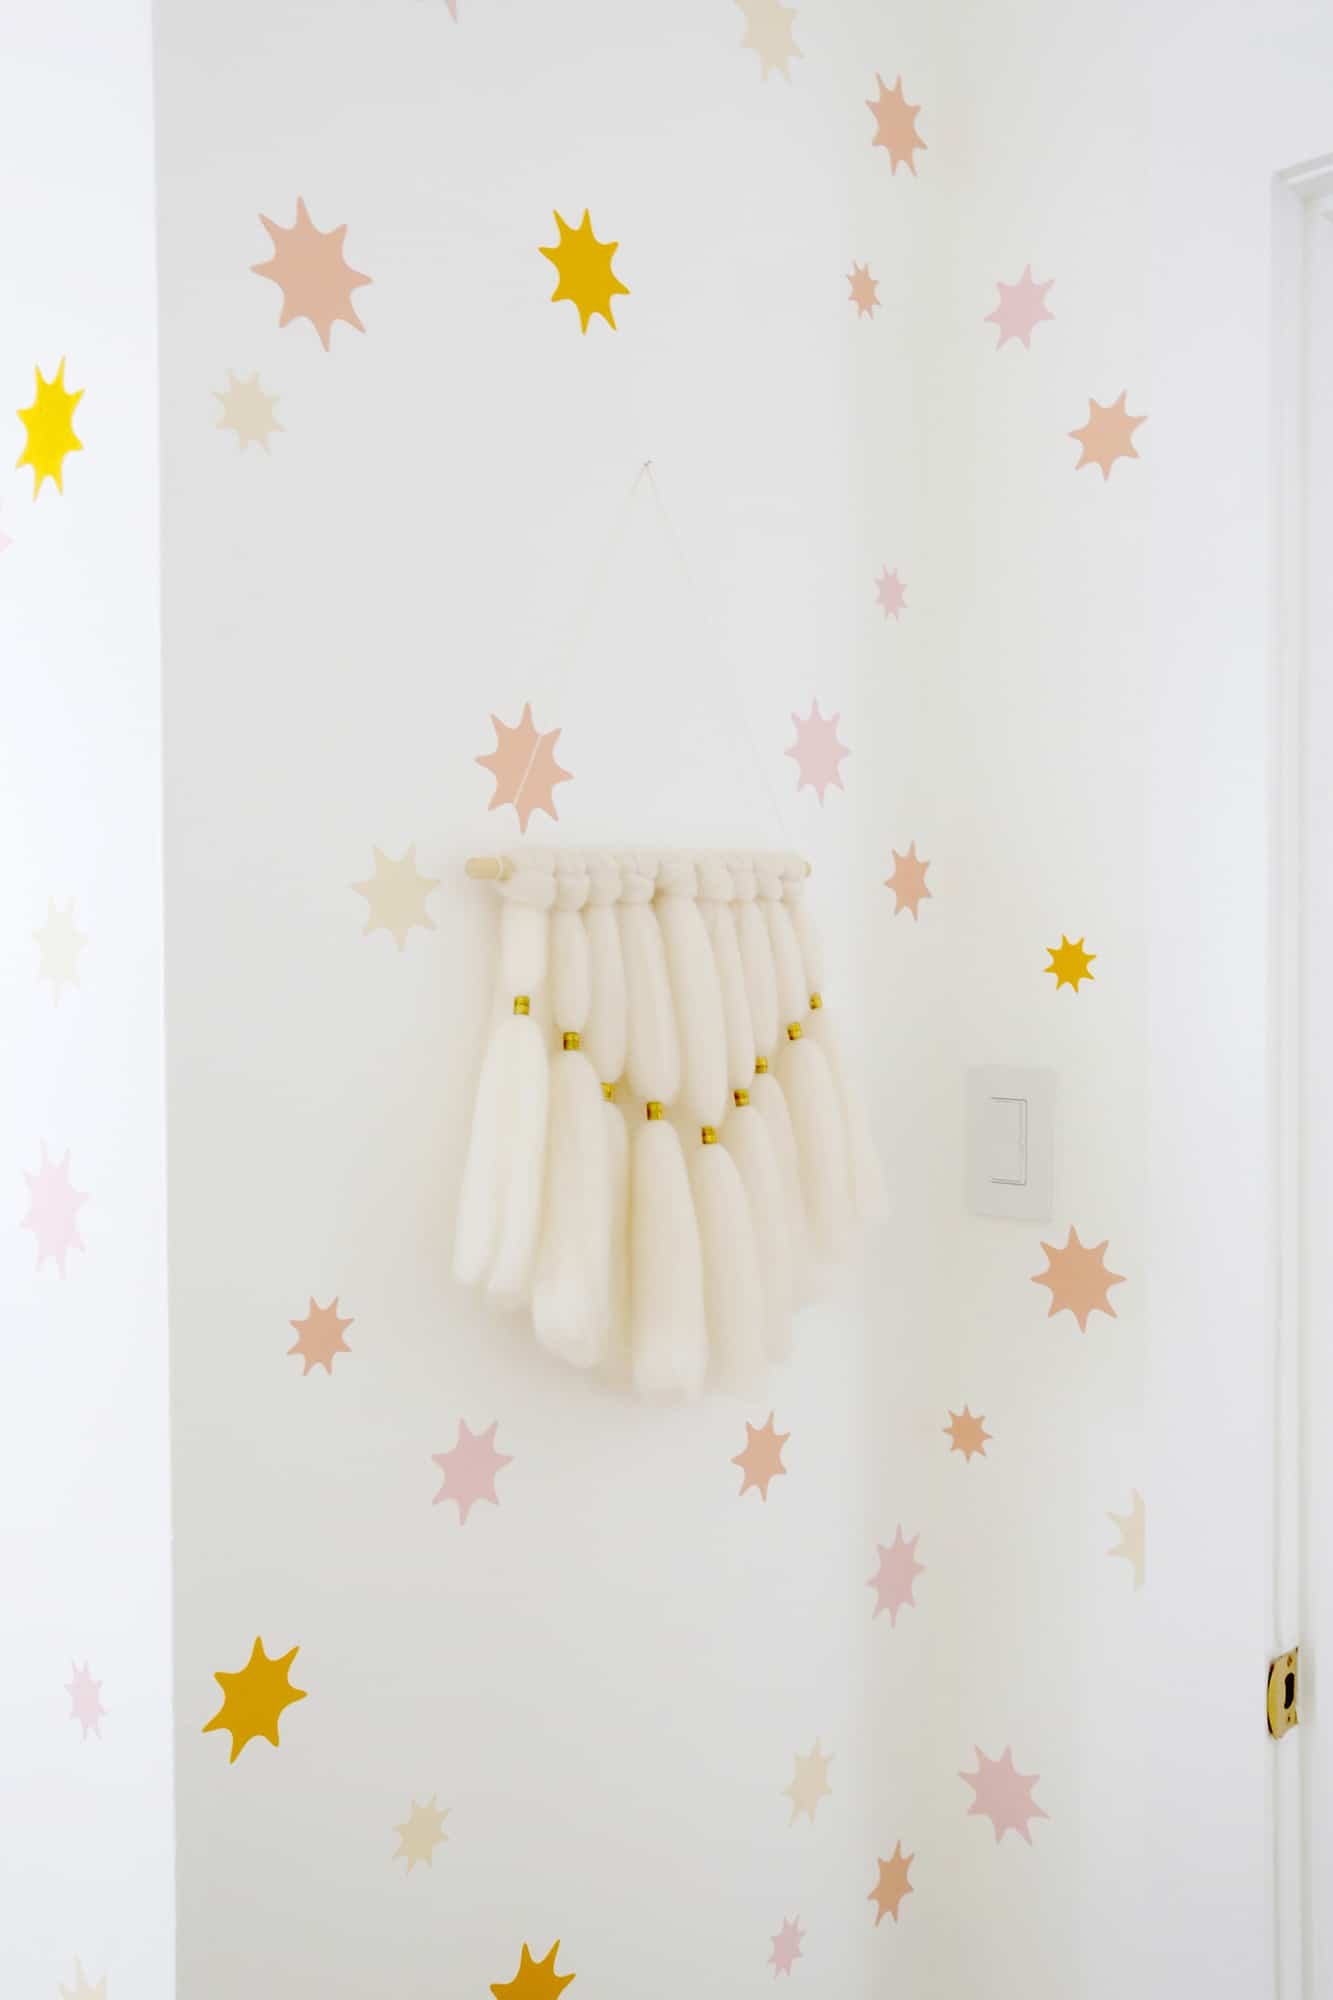 star wallpaper with a woven wall hanging